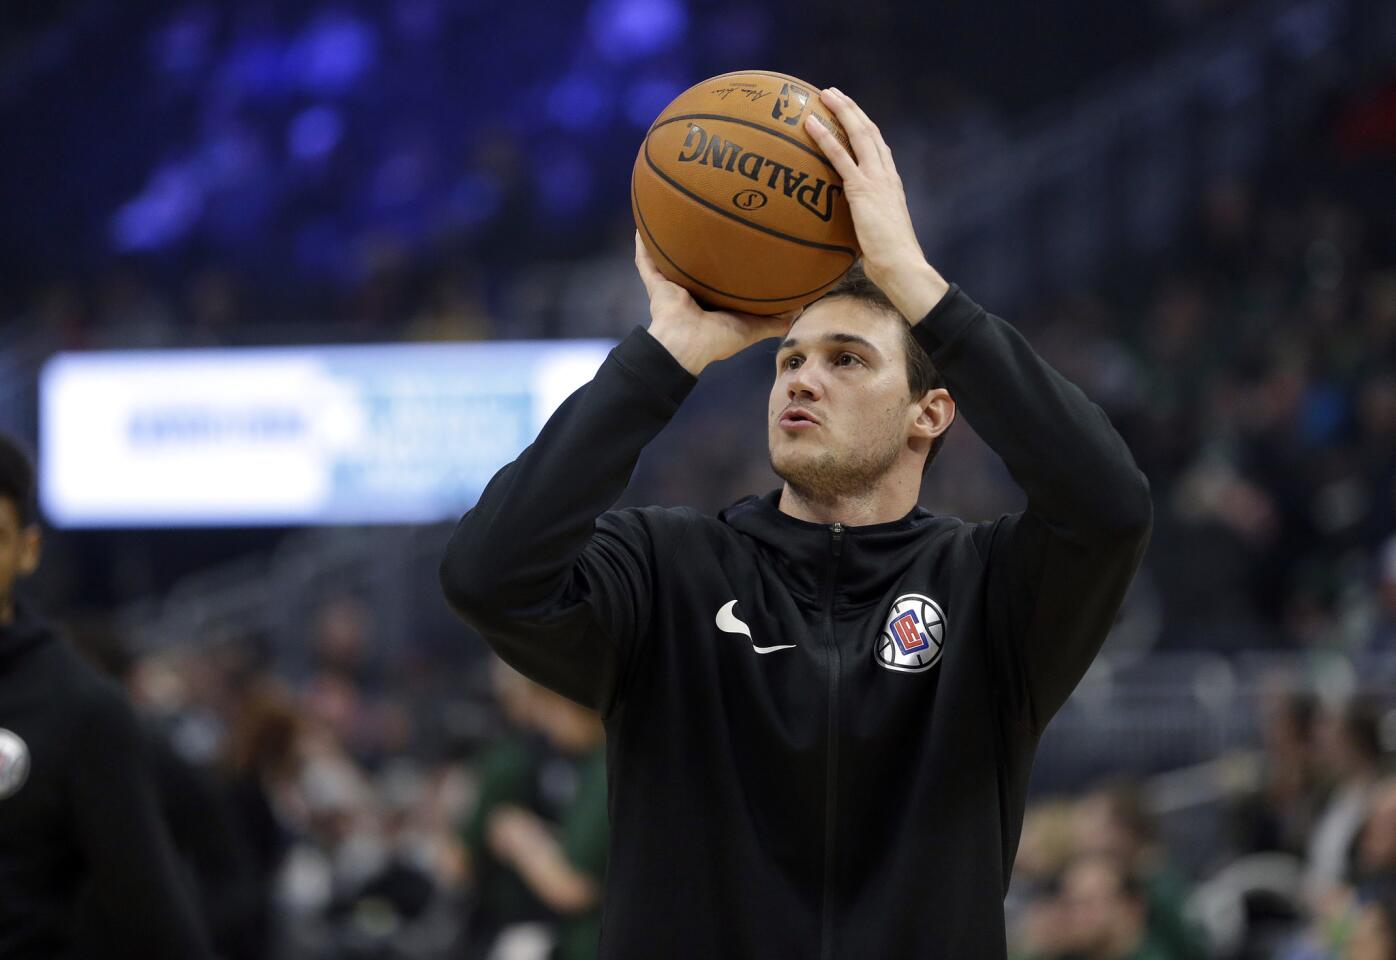 LA Clippers' Danilo Gallinari warms up before an NBA basketball game against the Milwaukee Bucks Thursday, March 28, 2019, in Milwaukee. (AP Photo/Aaron Gash)